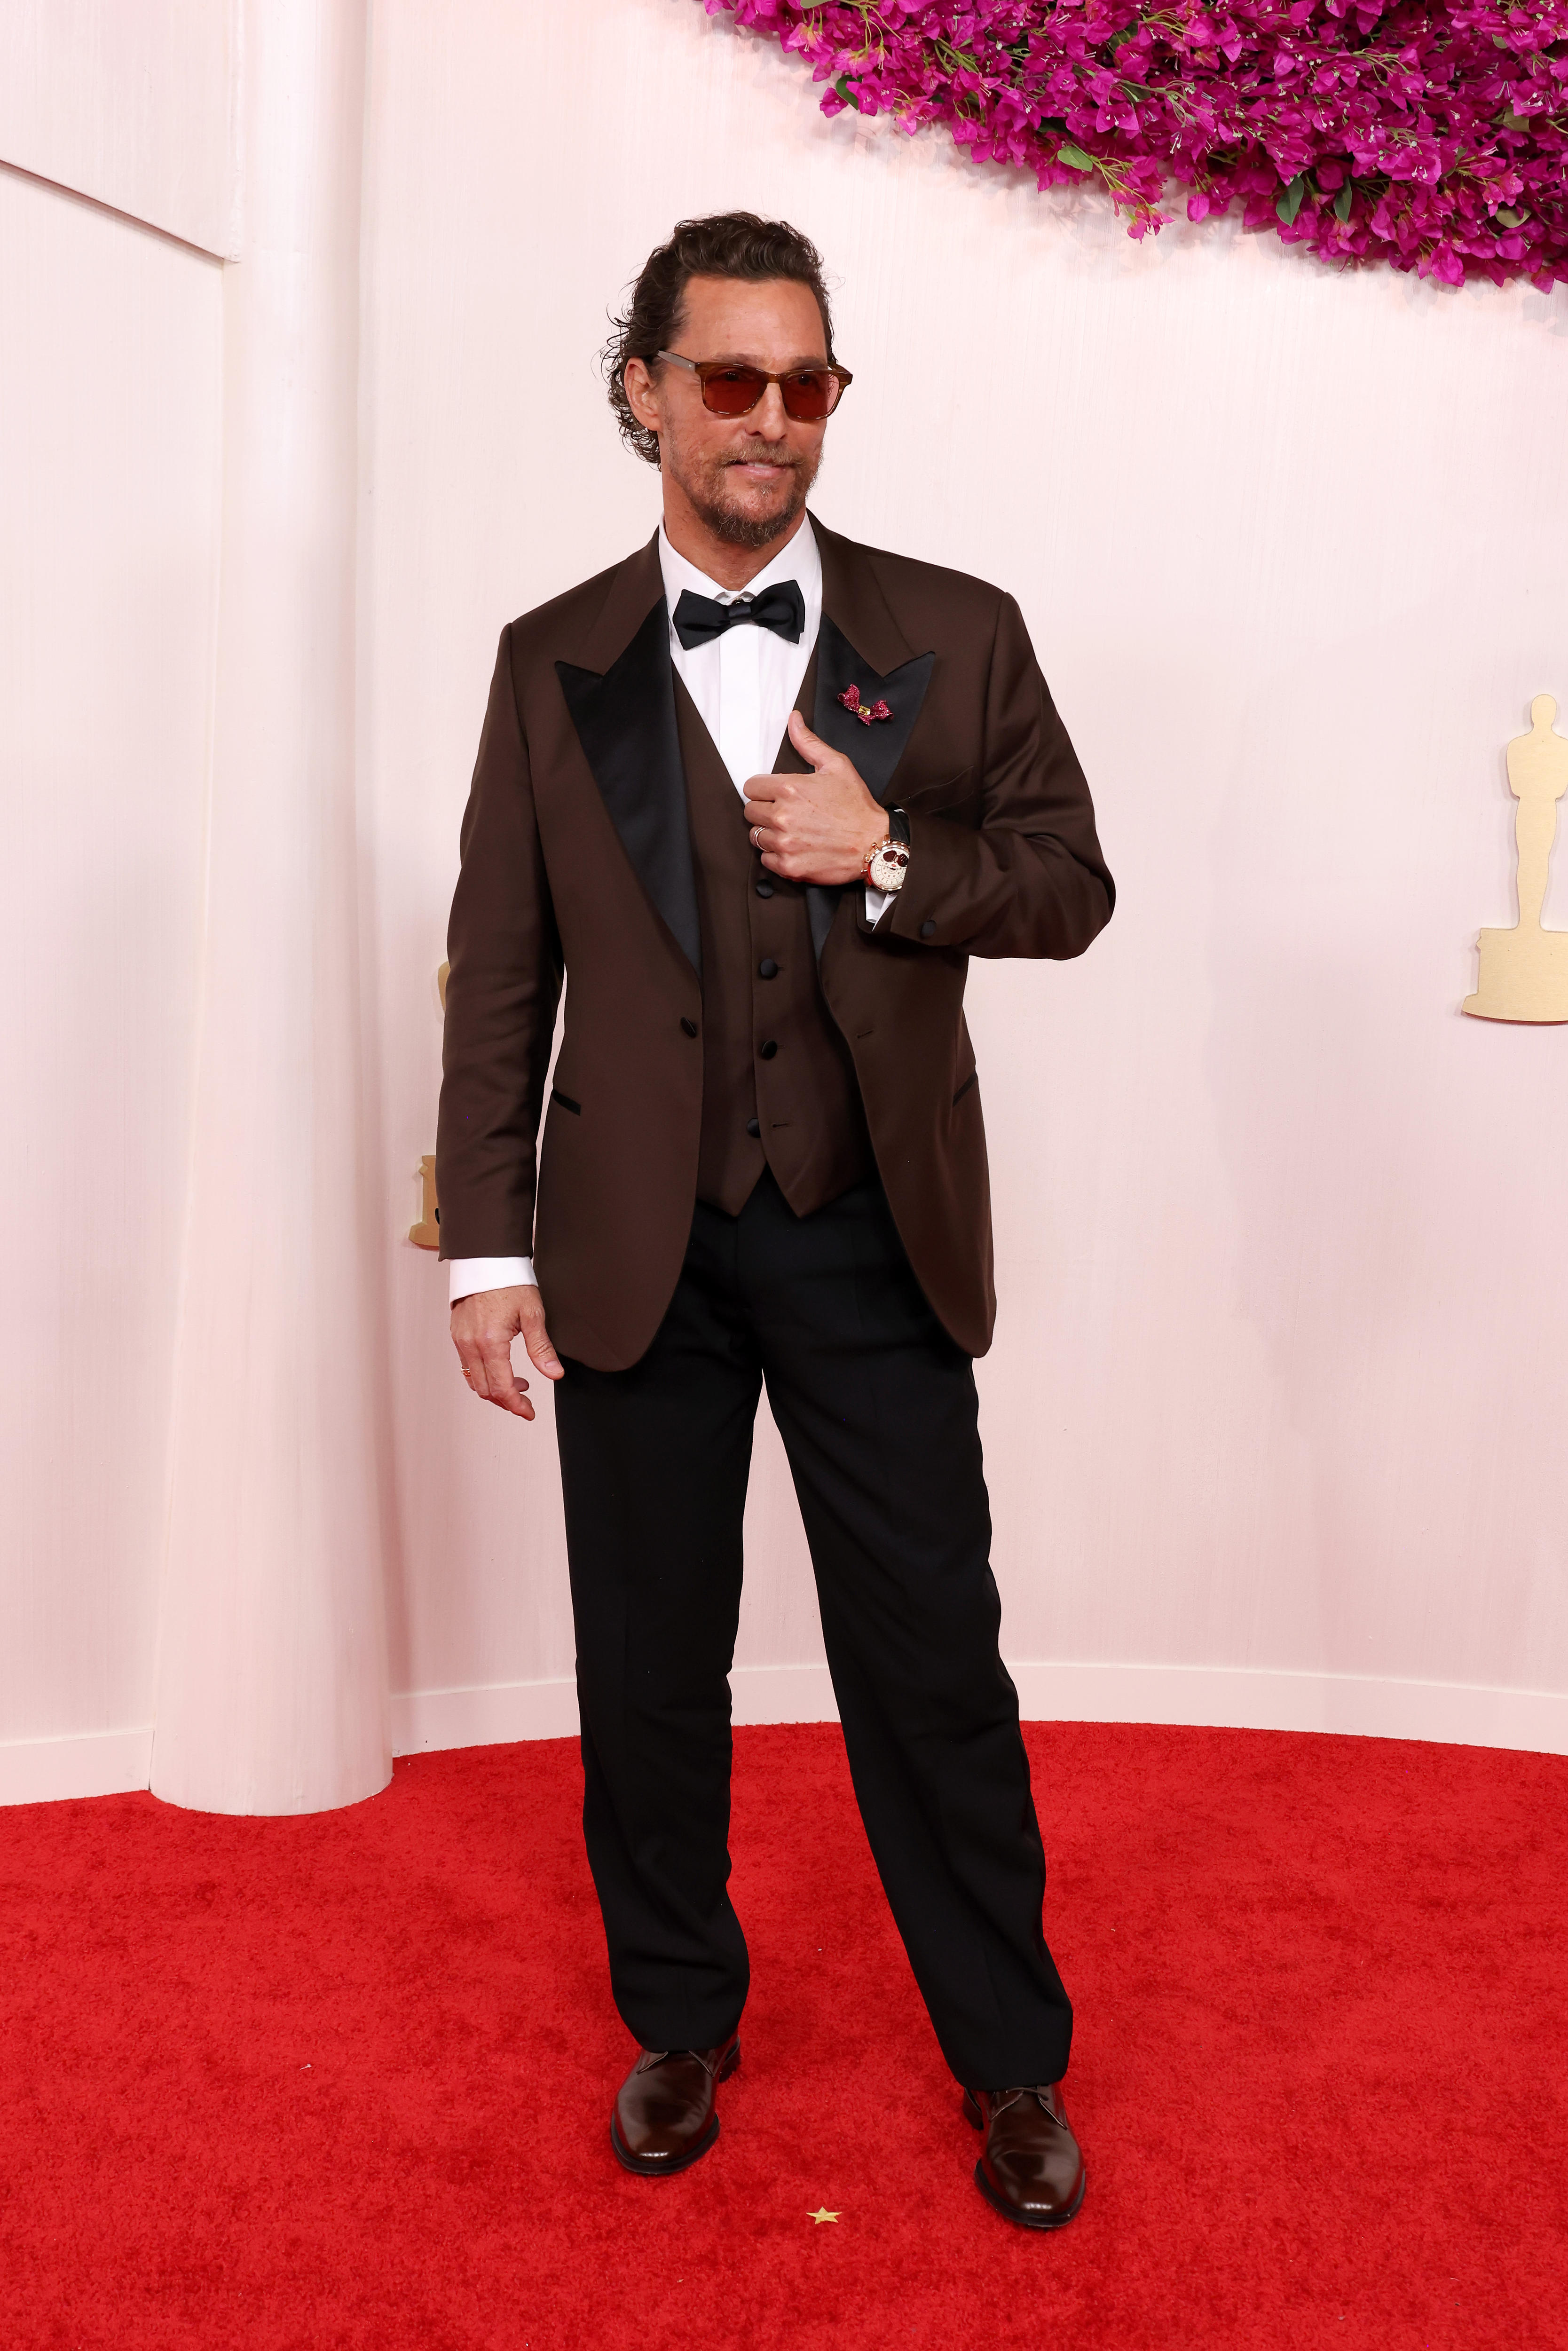 Matthew McConaughey in a burgundy suit on the Oscars red carpet